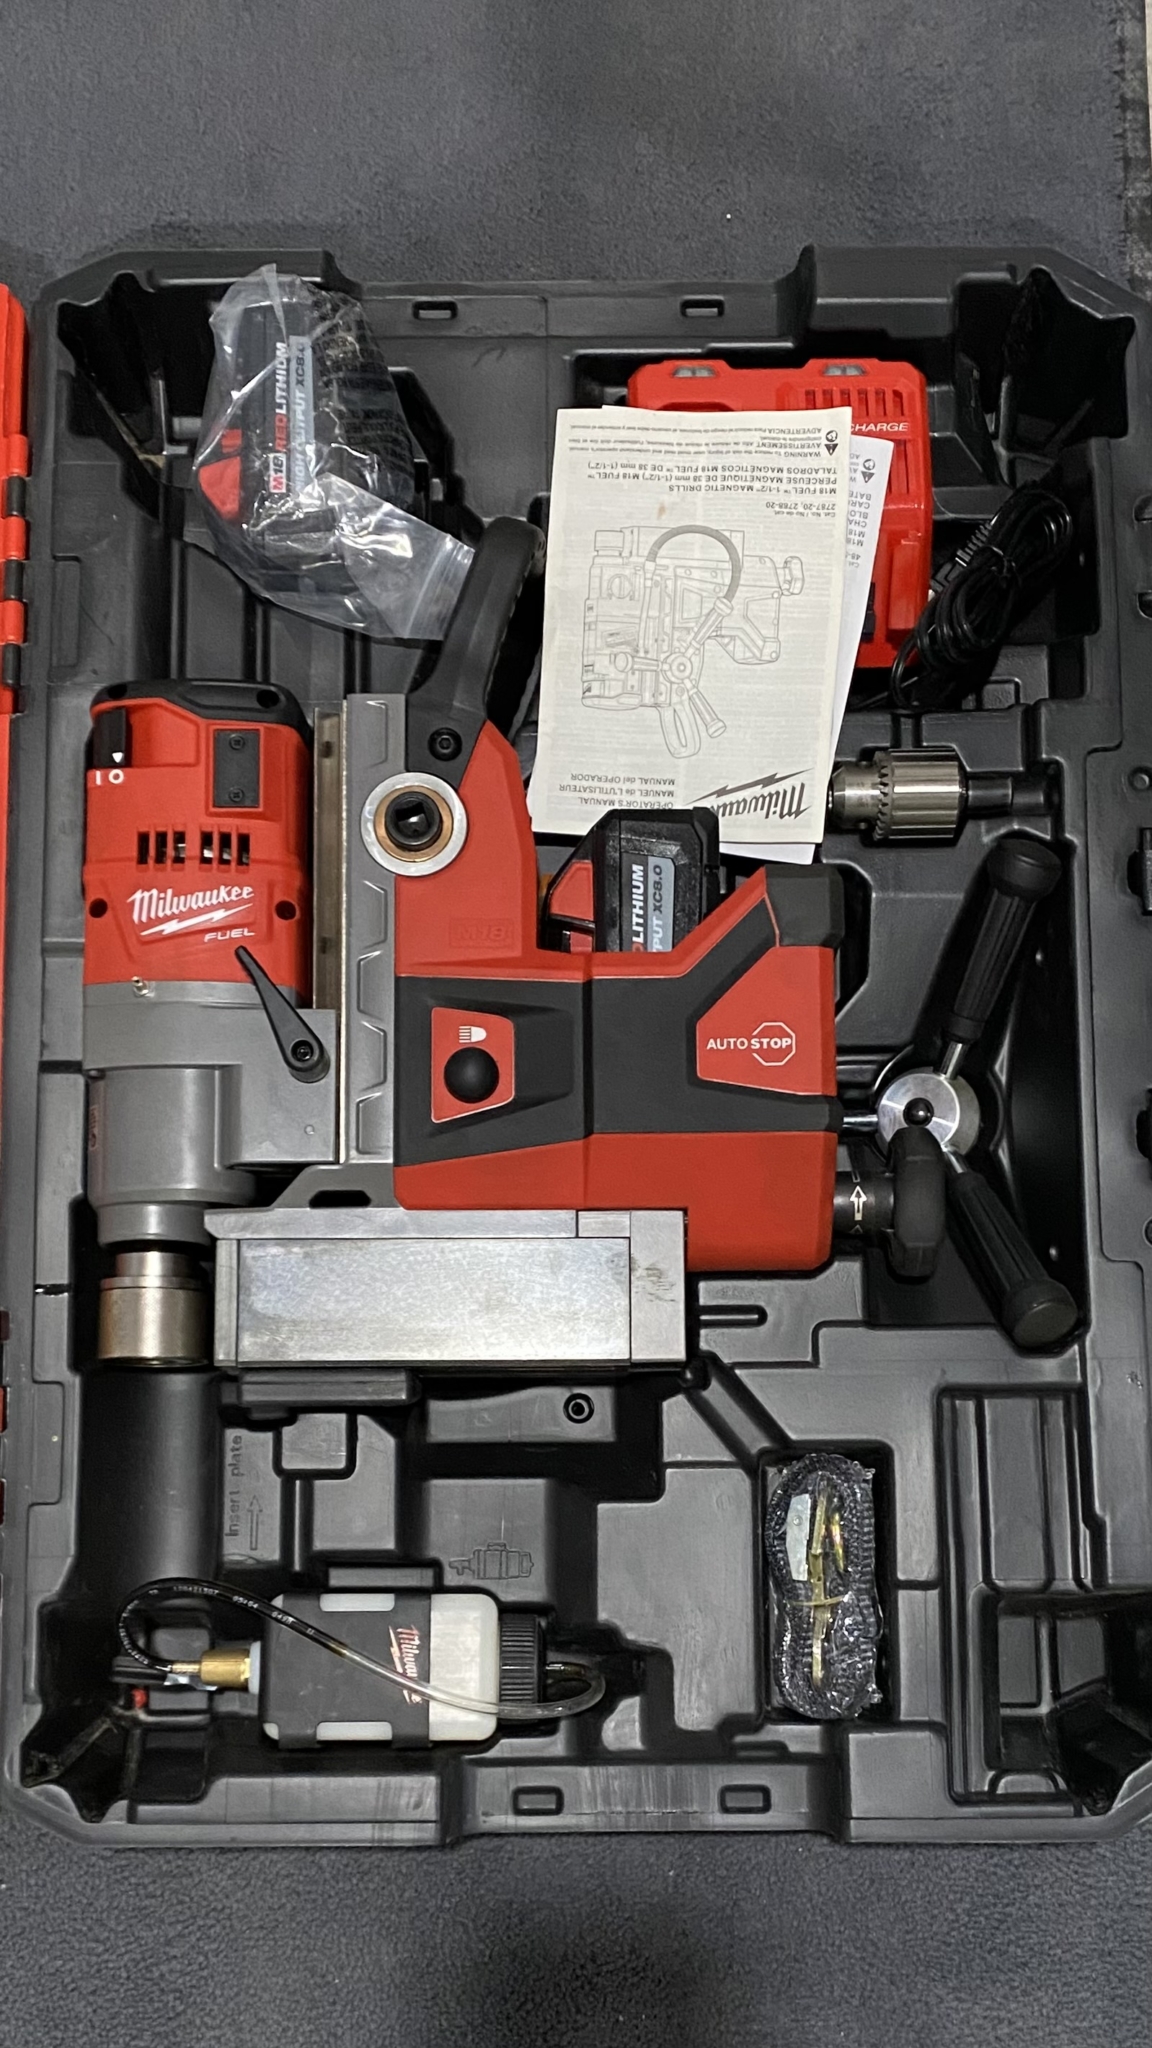 M18 Fuel 1 - 1/2" Magnetic Drill